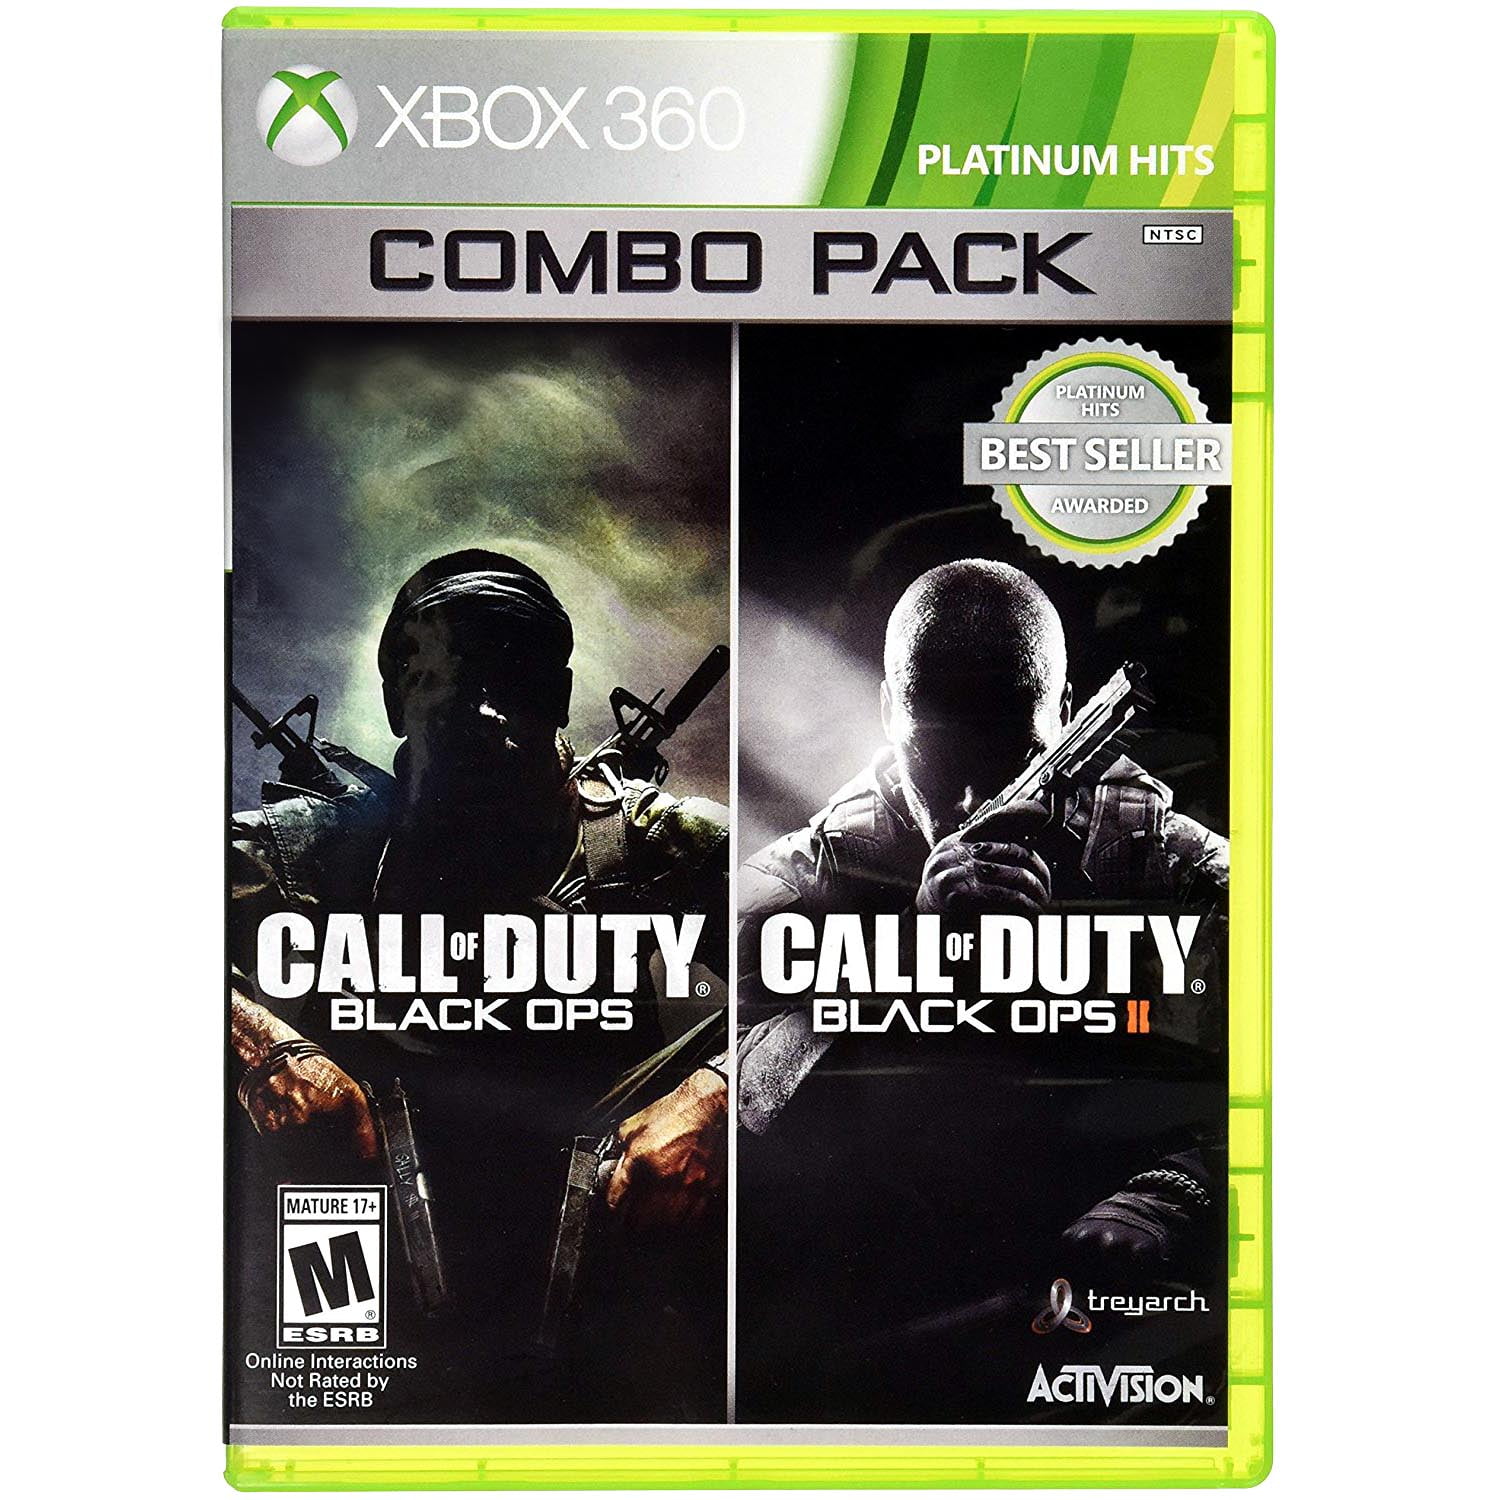 Call of Duty Black Ops 1 2 Combo Pack, Activision, [Physical], 047875881723 - Walmart.com